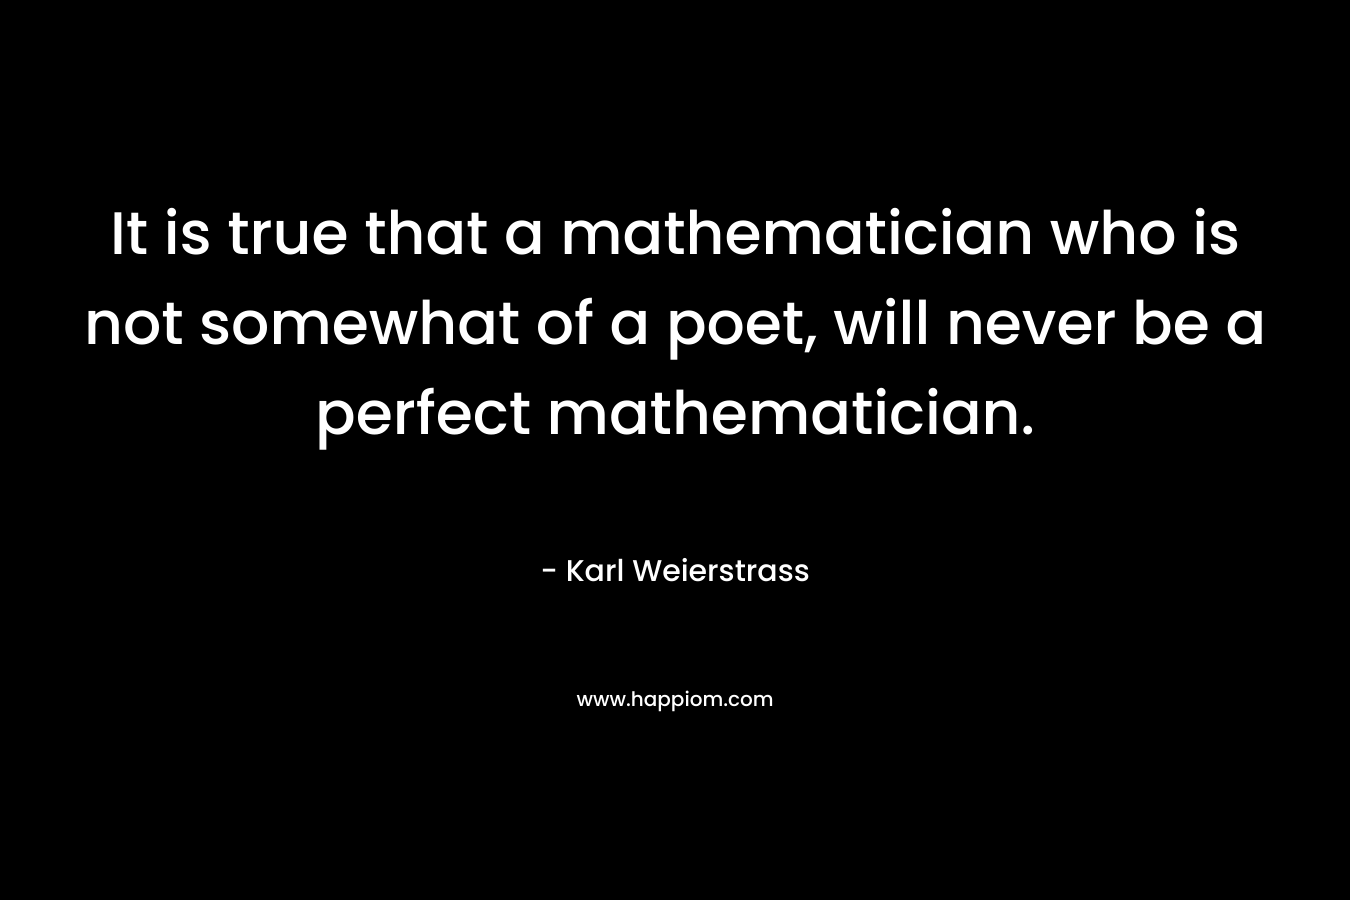 It is true that a mathematician who is not somewhat of a poet, will never be a perfect mathematician.